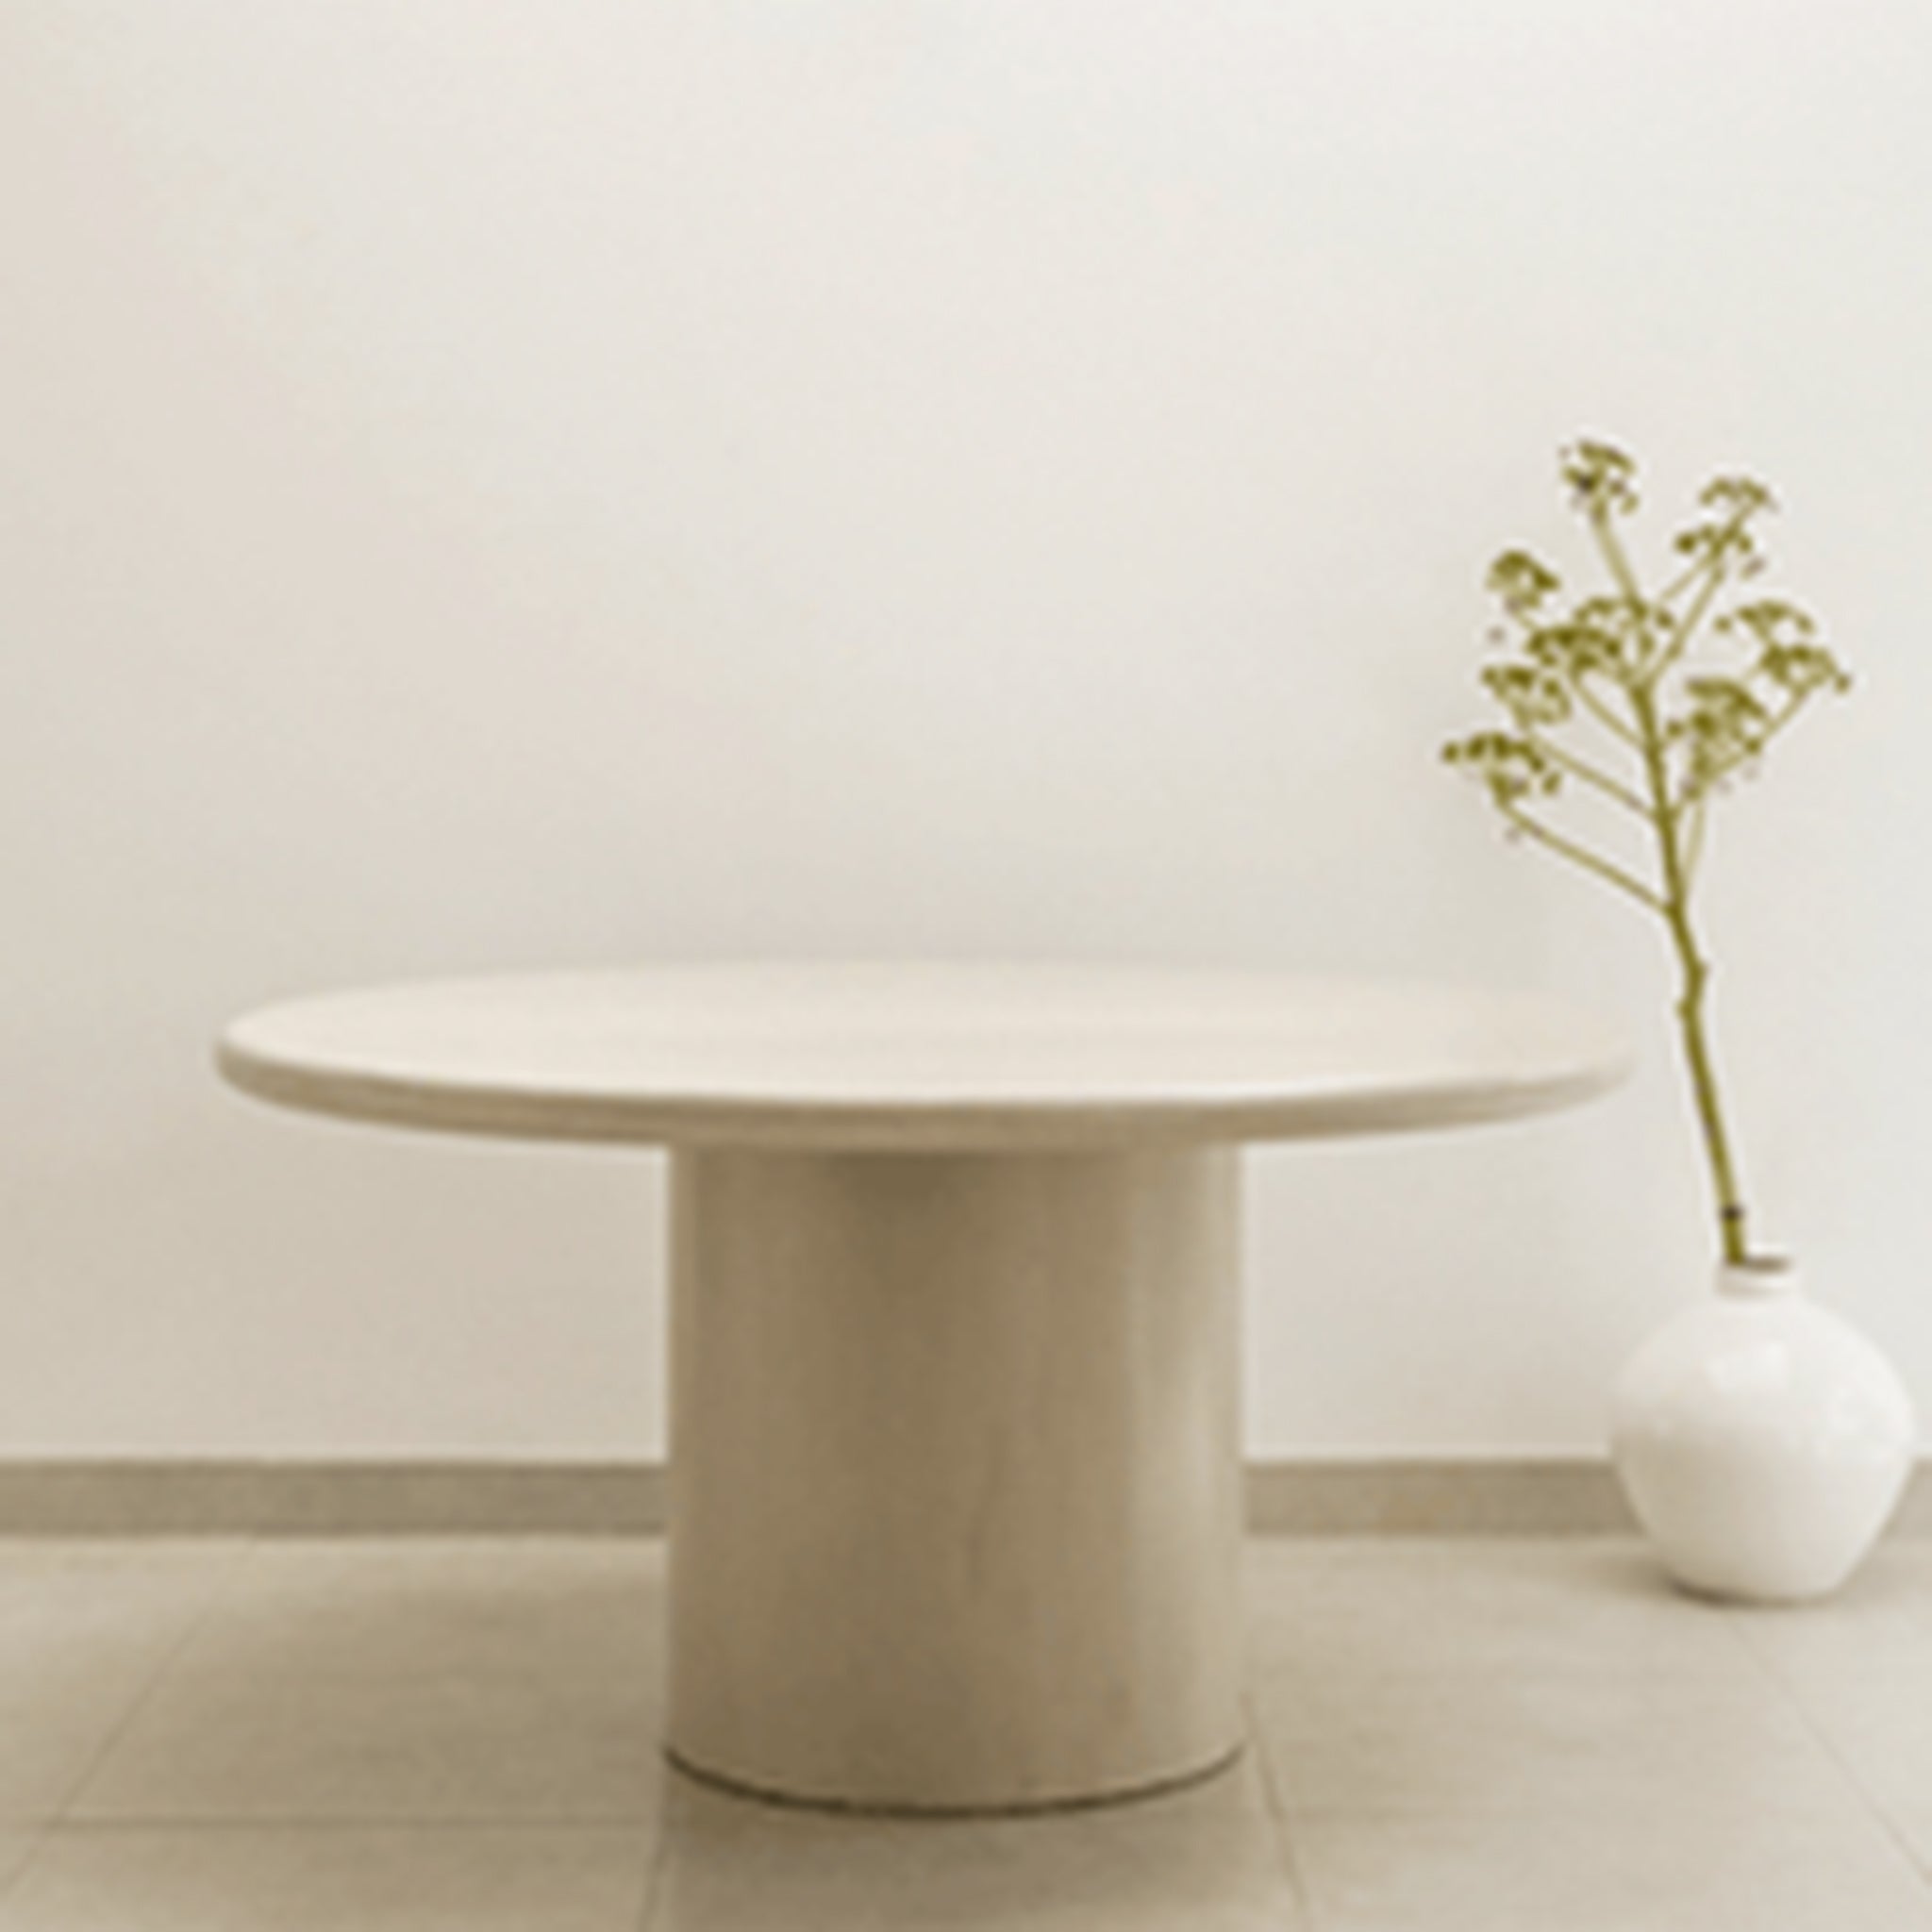 Round dining table with a minimalist and clean aesthetic